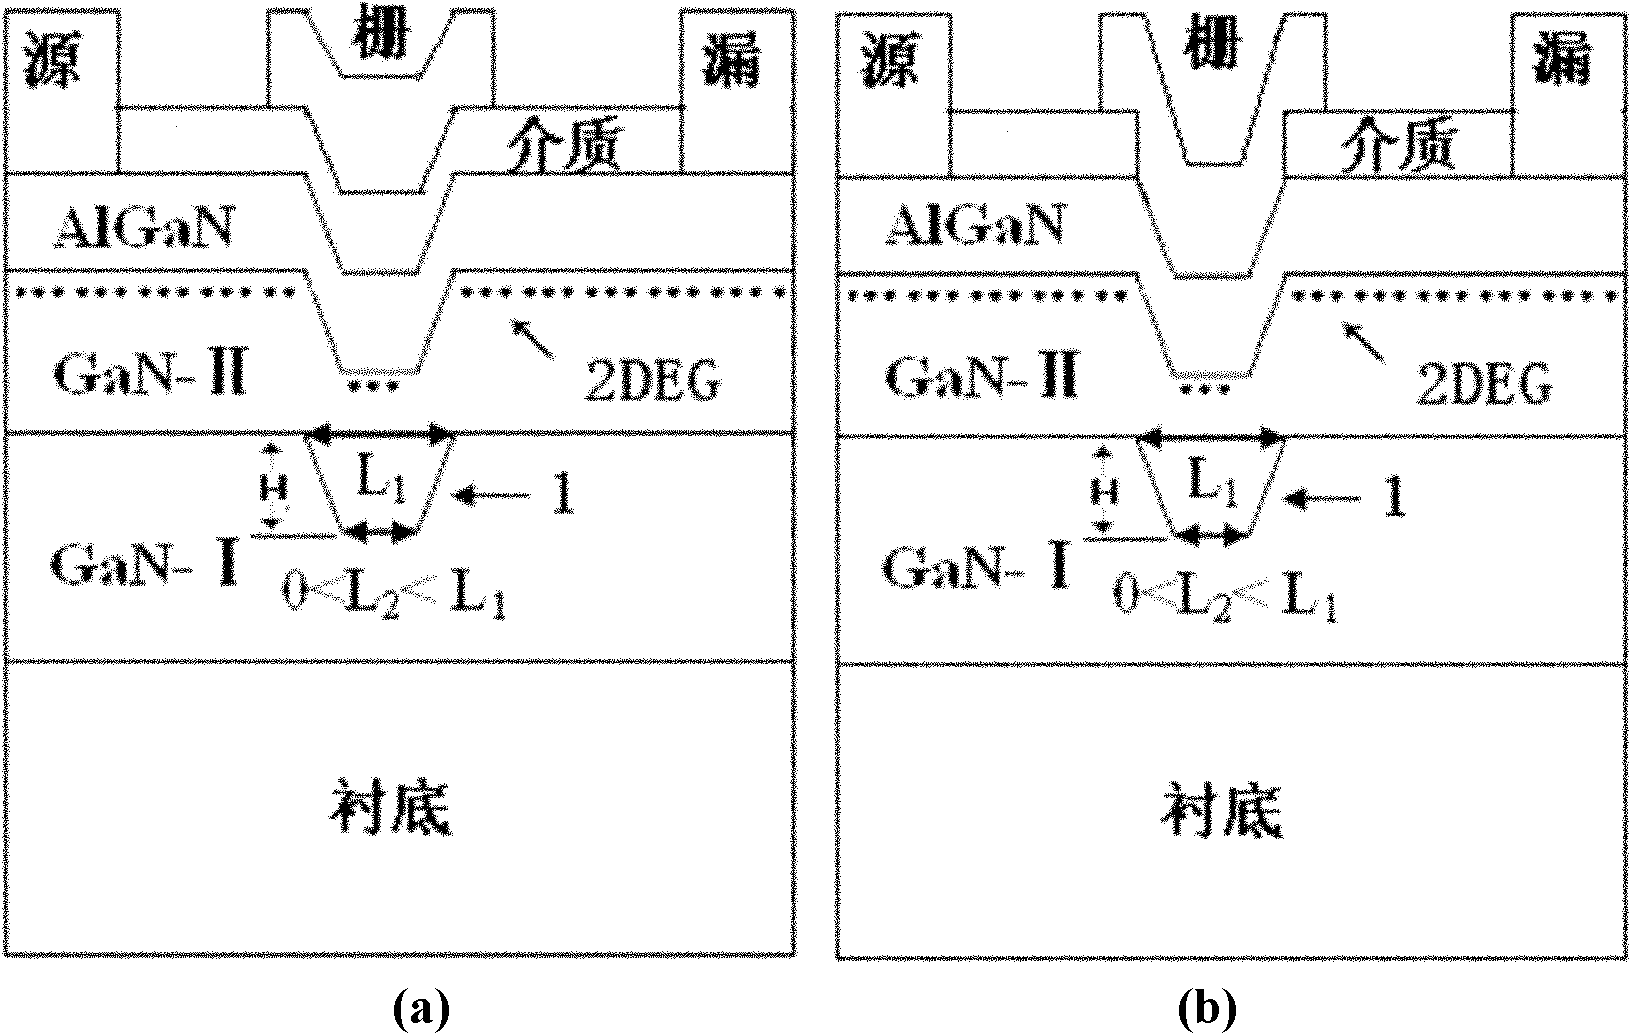 Groove-shaped channel AlGaN/GaN-reinforced high electron mobility transistor (HEMT) component and manufacturing method thereof